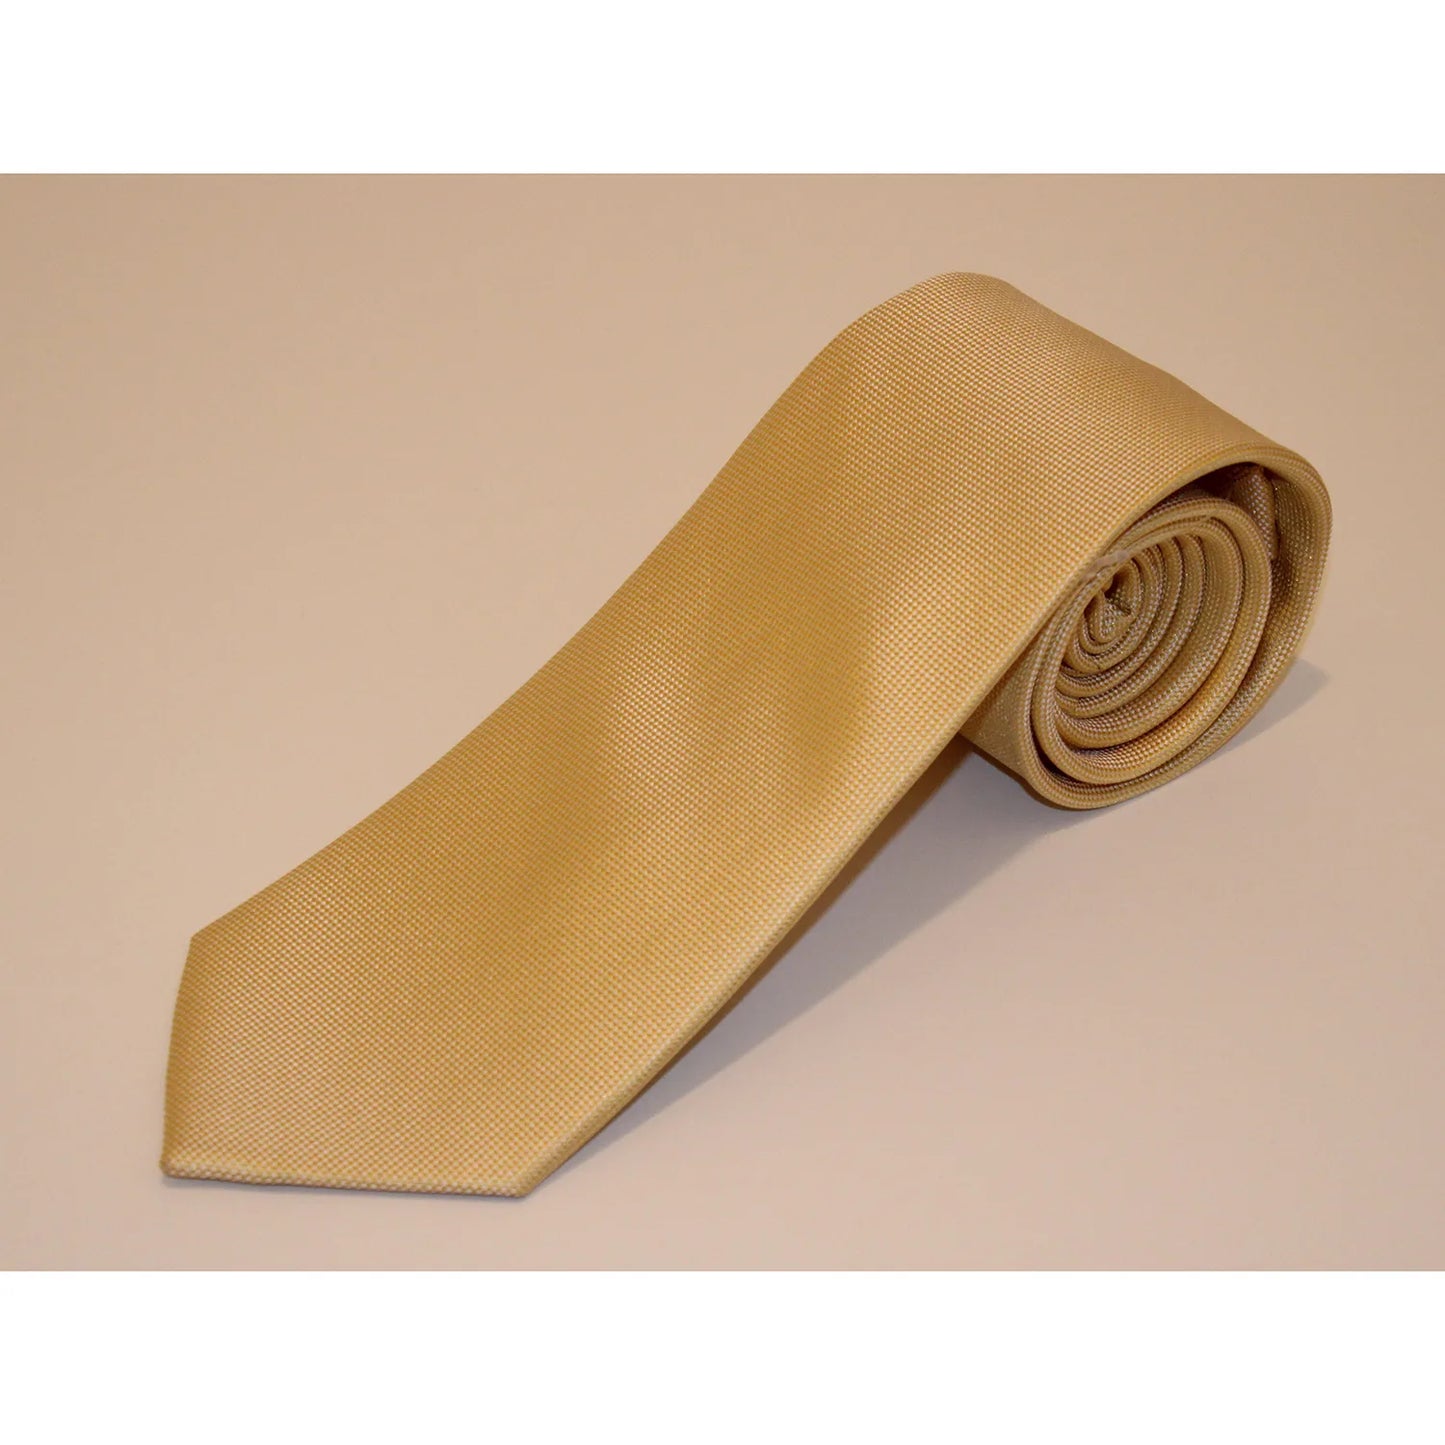 Scotty Z Tall Tie - Solid Yellow